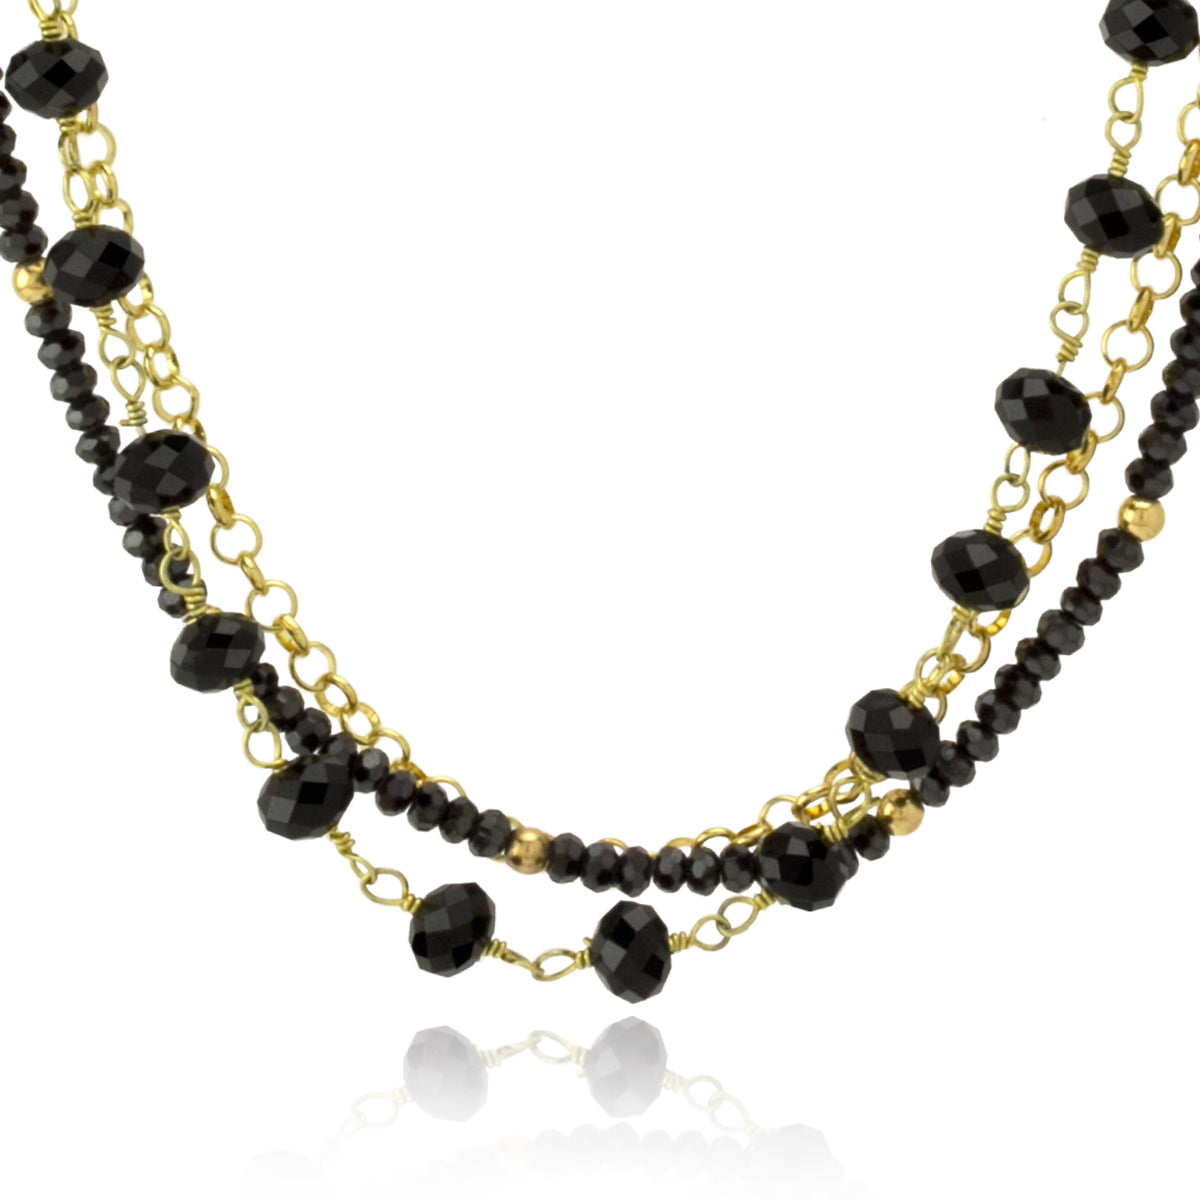 Layered Onyx & Spinel Necklace